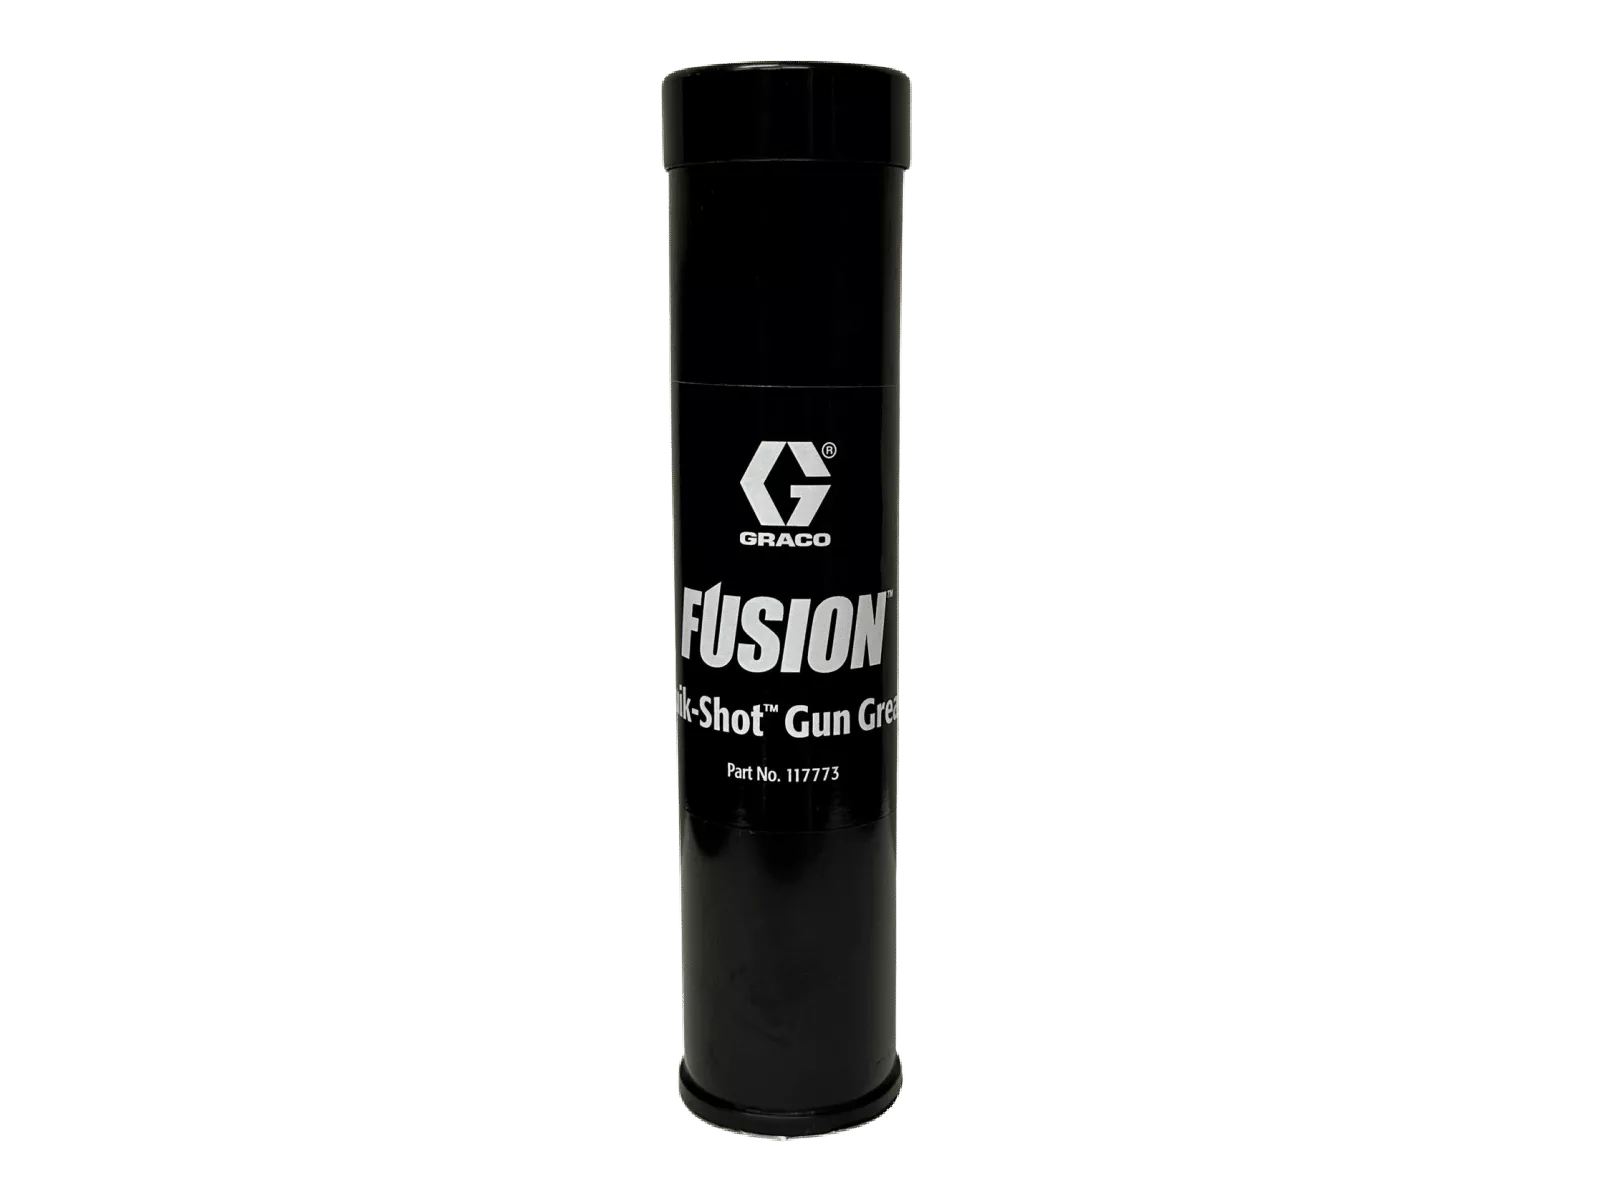 Graco Fusion Quick-Shot Gun Grease - Thin Black Cylinder Filled with Grease